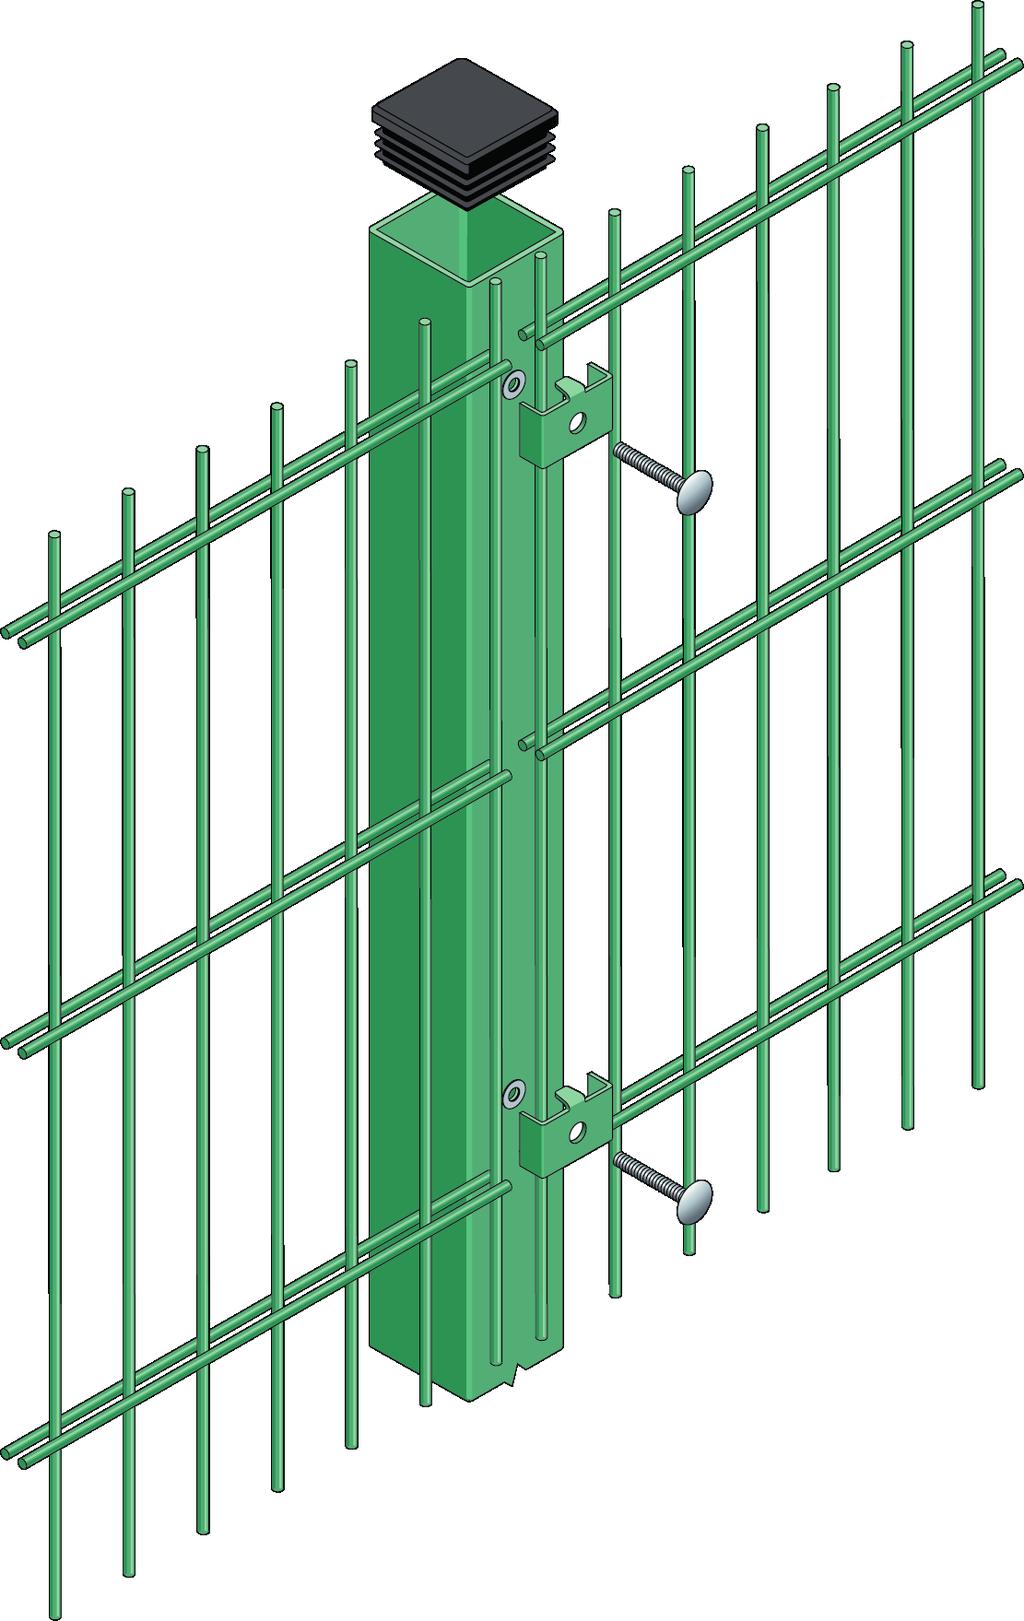 FENESFE ULOK-LITE Flat panel to accommodate debris netting Steel security clip with security pin hex screw Twin horizontal wires for maximum rigidity 30mm edge projection to provide anti-climb